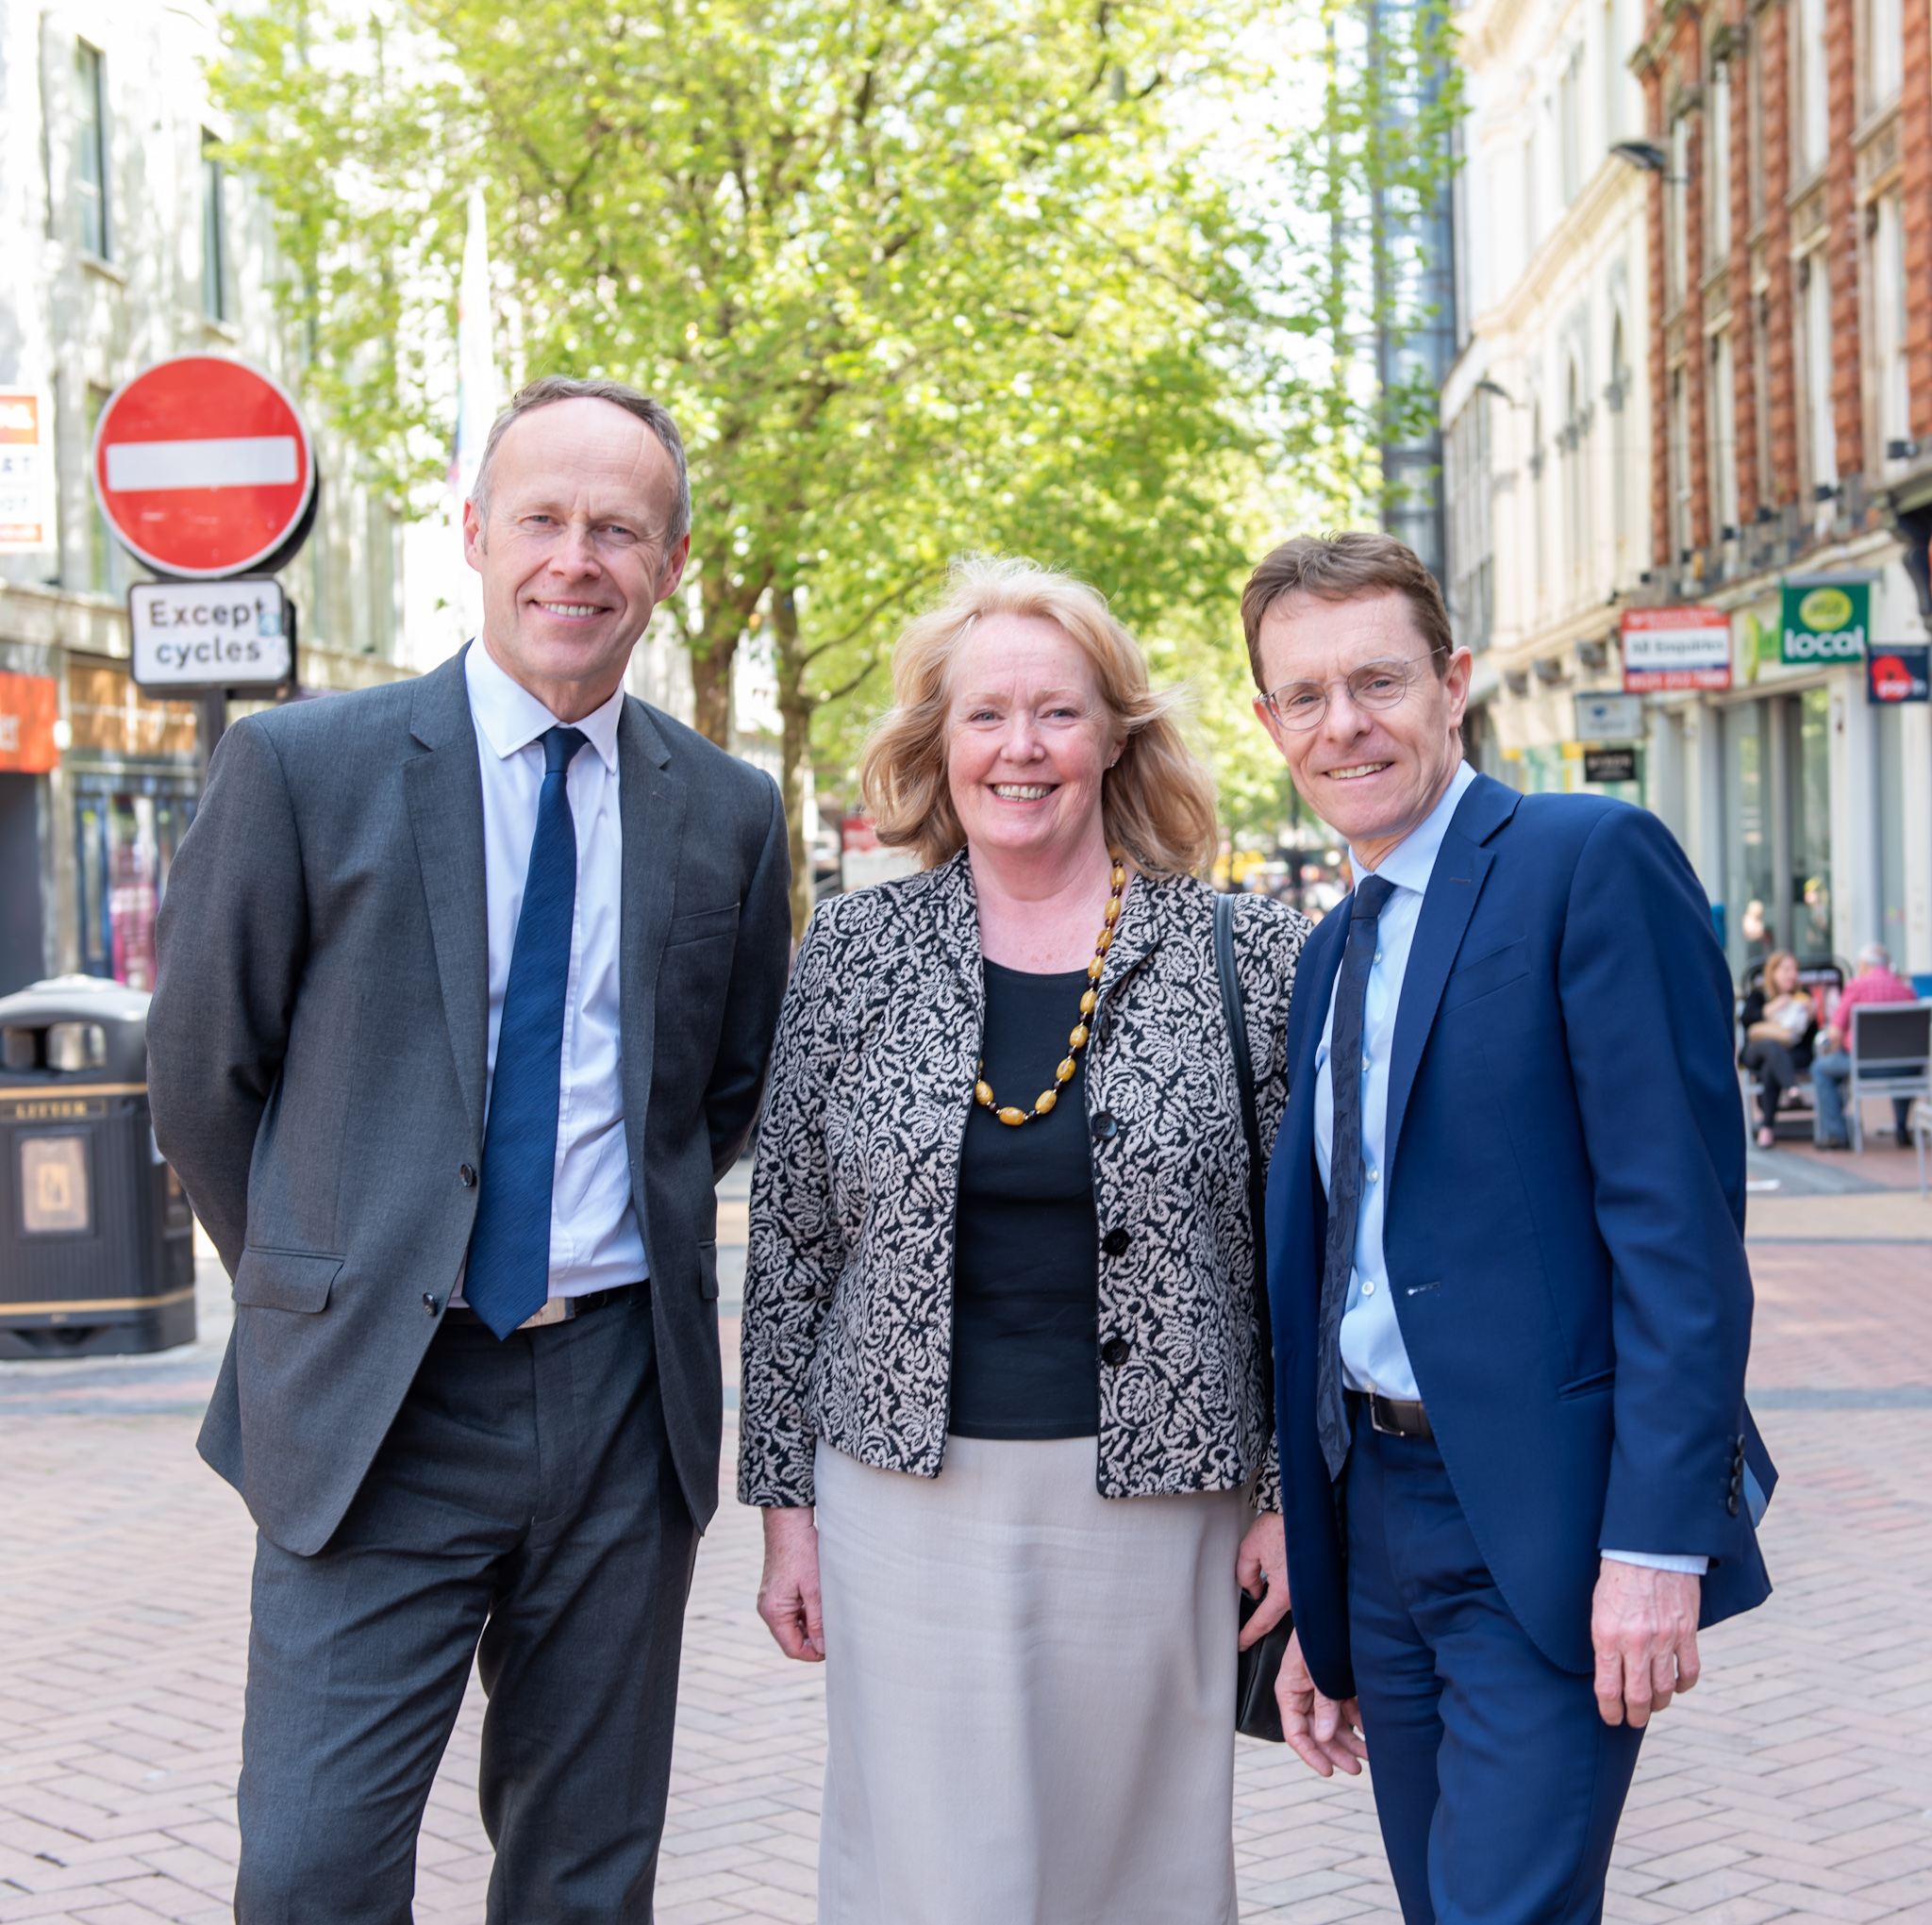 L-R Jon Bramwell, chair of the Regional Town Centre Task Force, Patricia Willoughby, head of policy - housing and regeneration at the WMCA, and Mayor of the West Midlands Andy Street